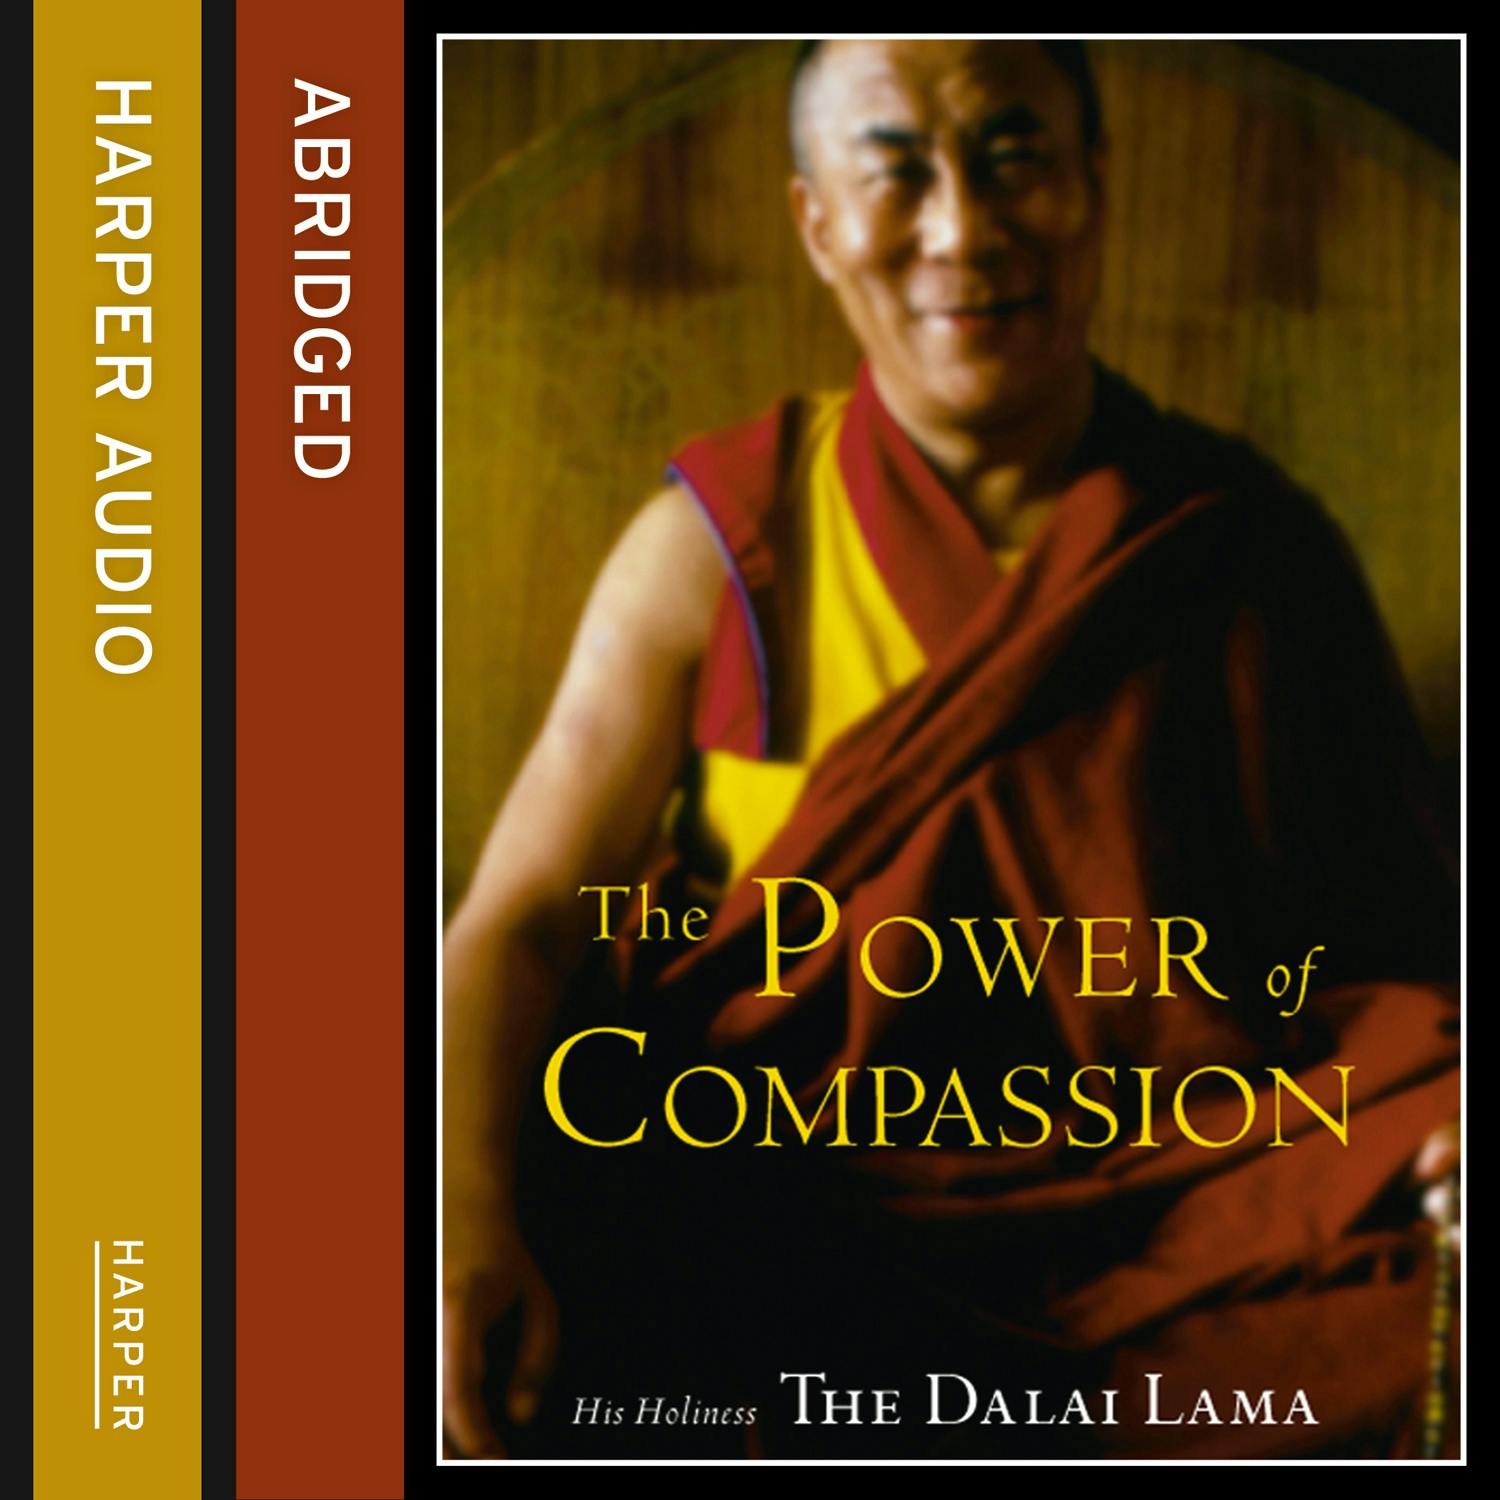 The Power of Compassion: A Collection of Lectures - His Holiness the Dalai Lama